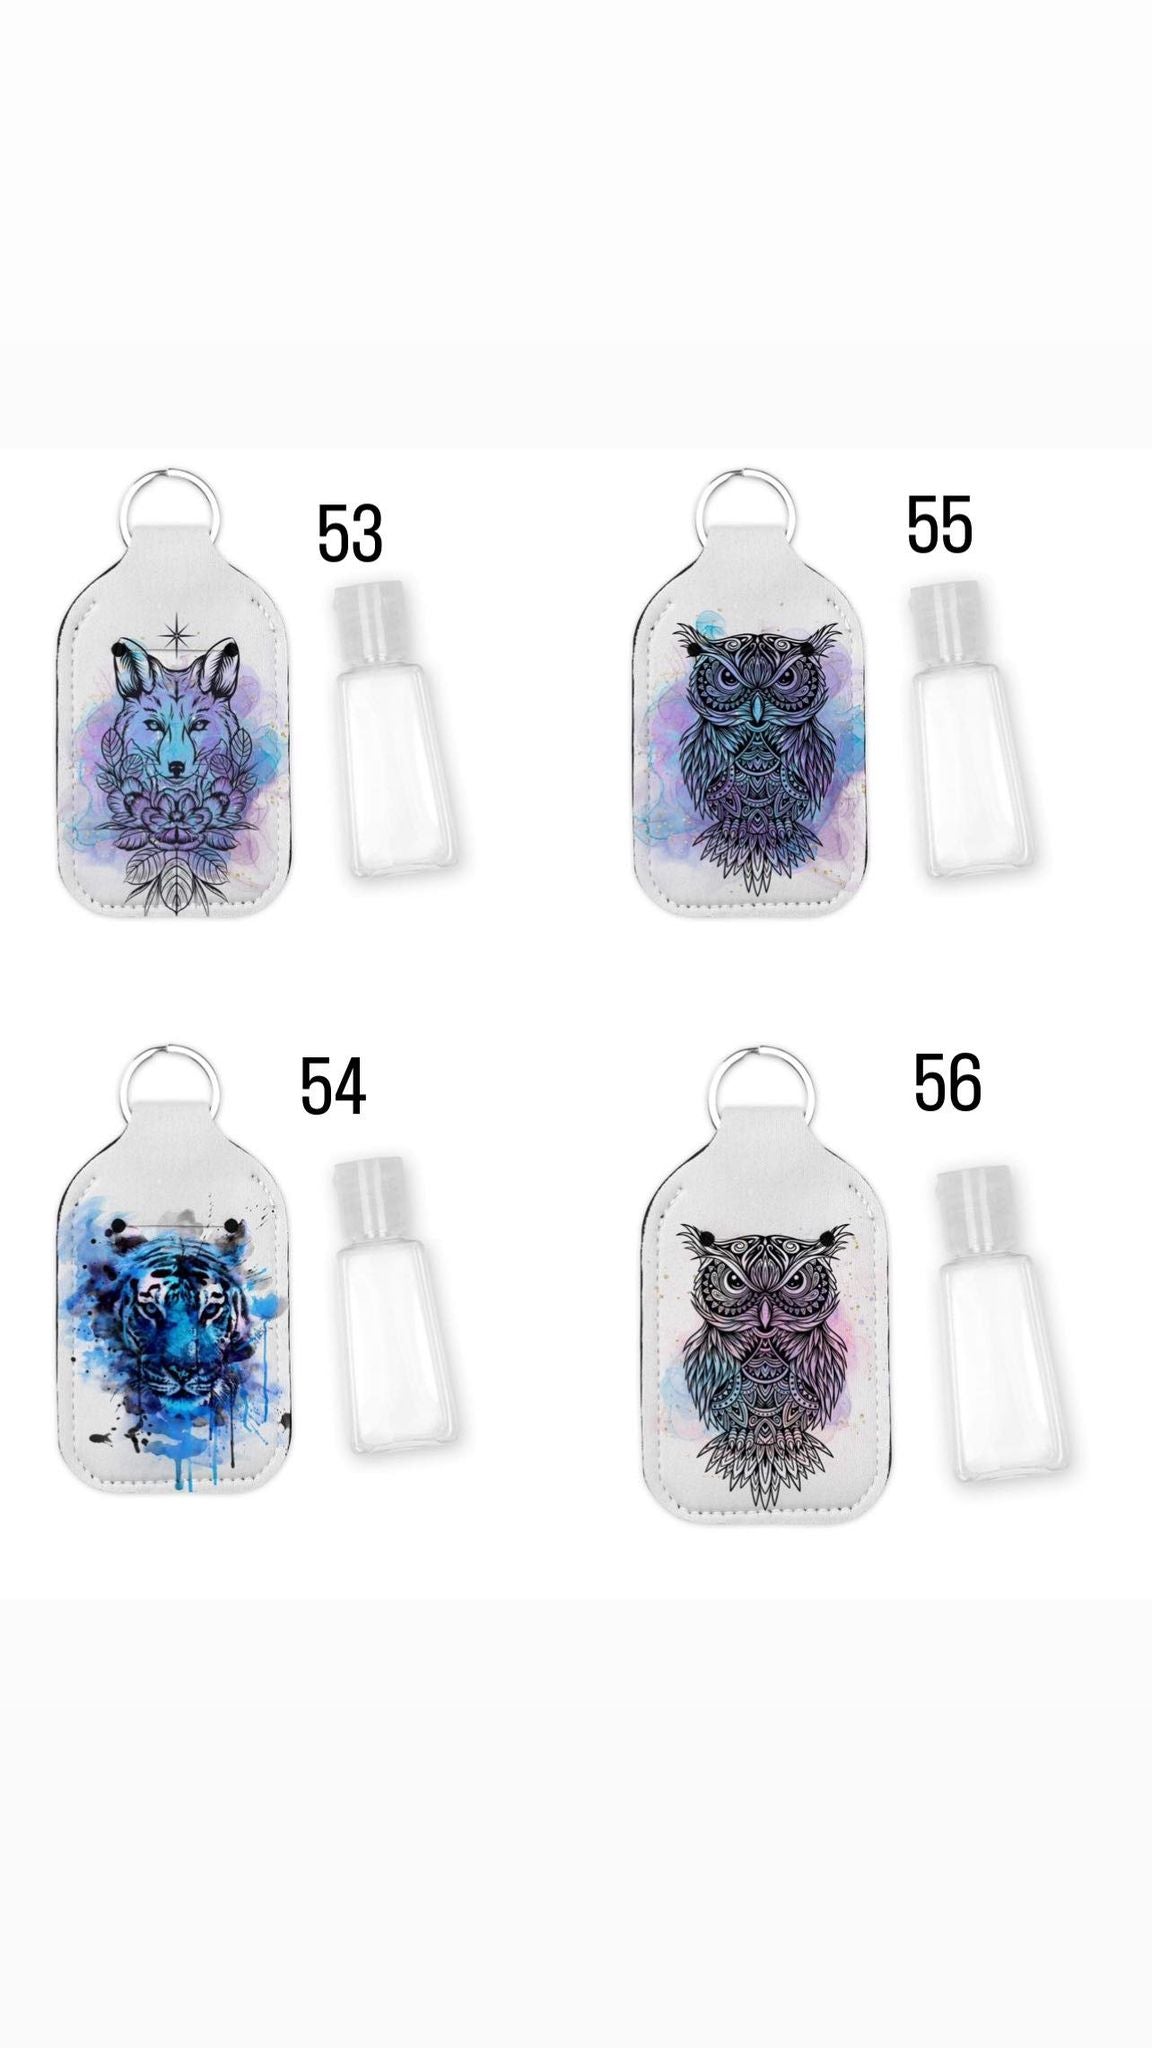 Hand sanitizer holders only!